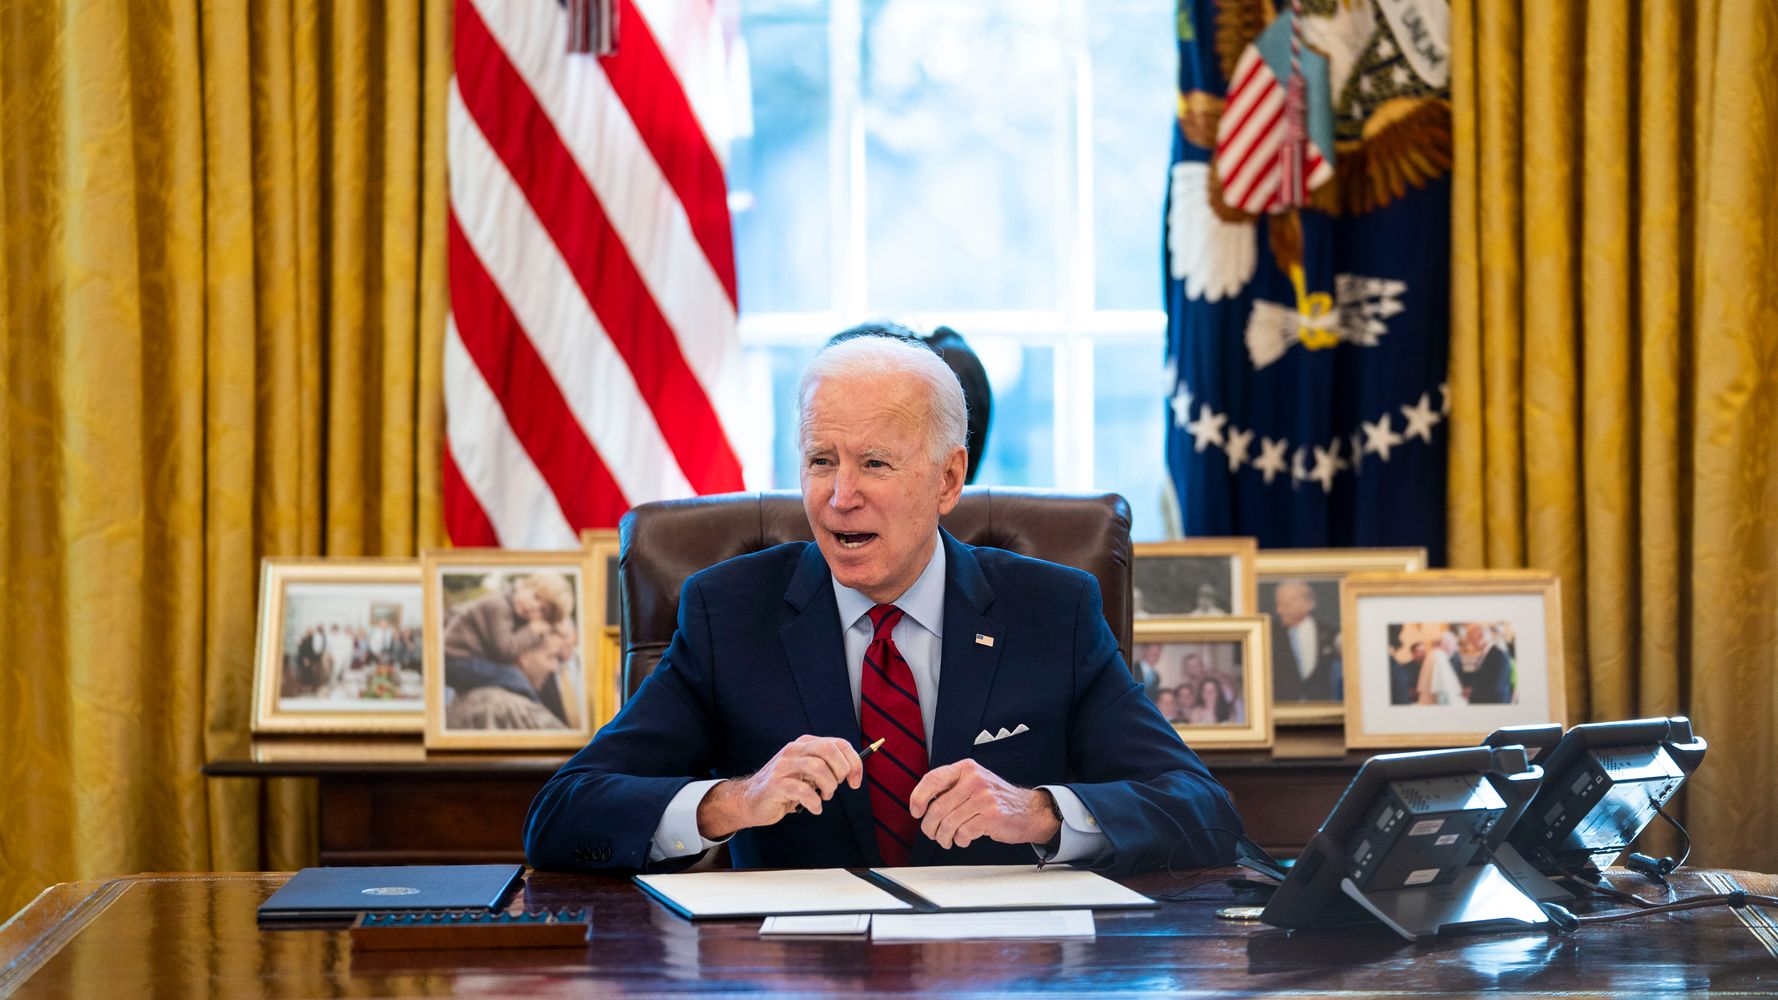 Here’s What Could Happen If Biden Forgives Student Loan Debt